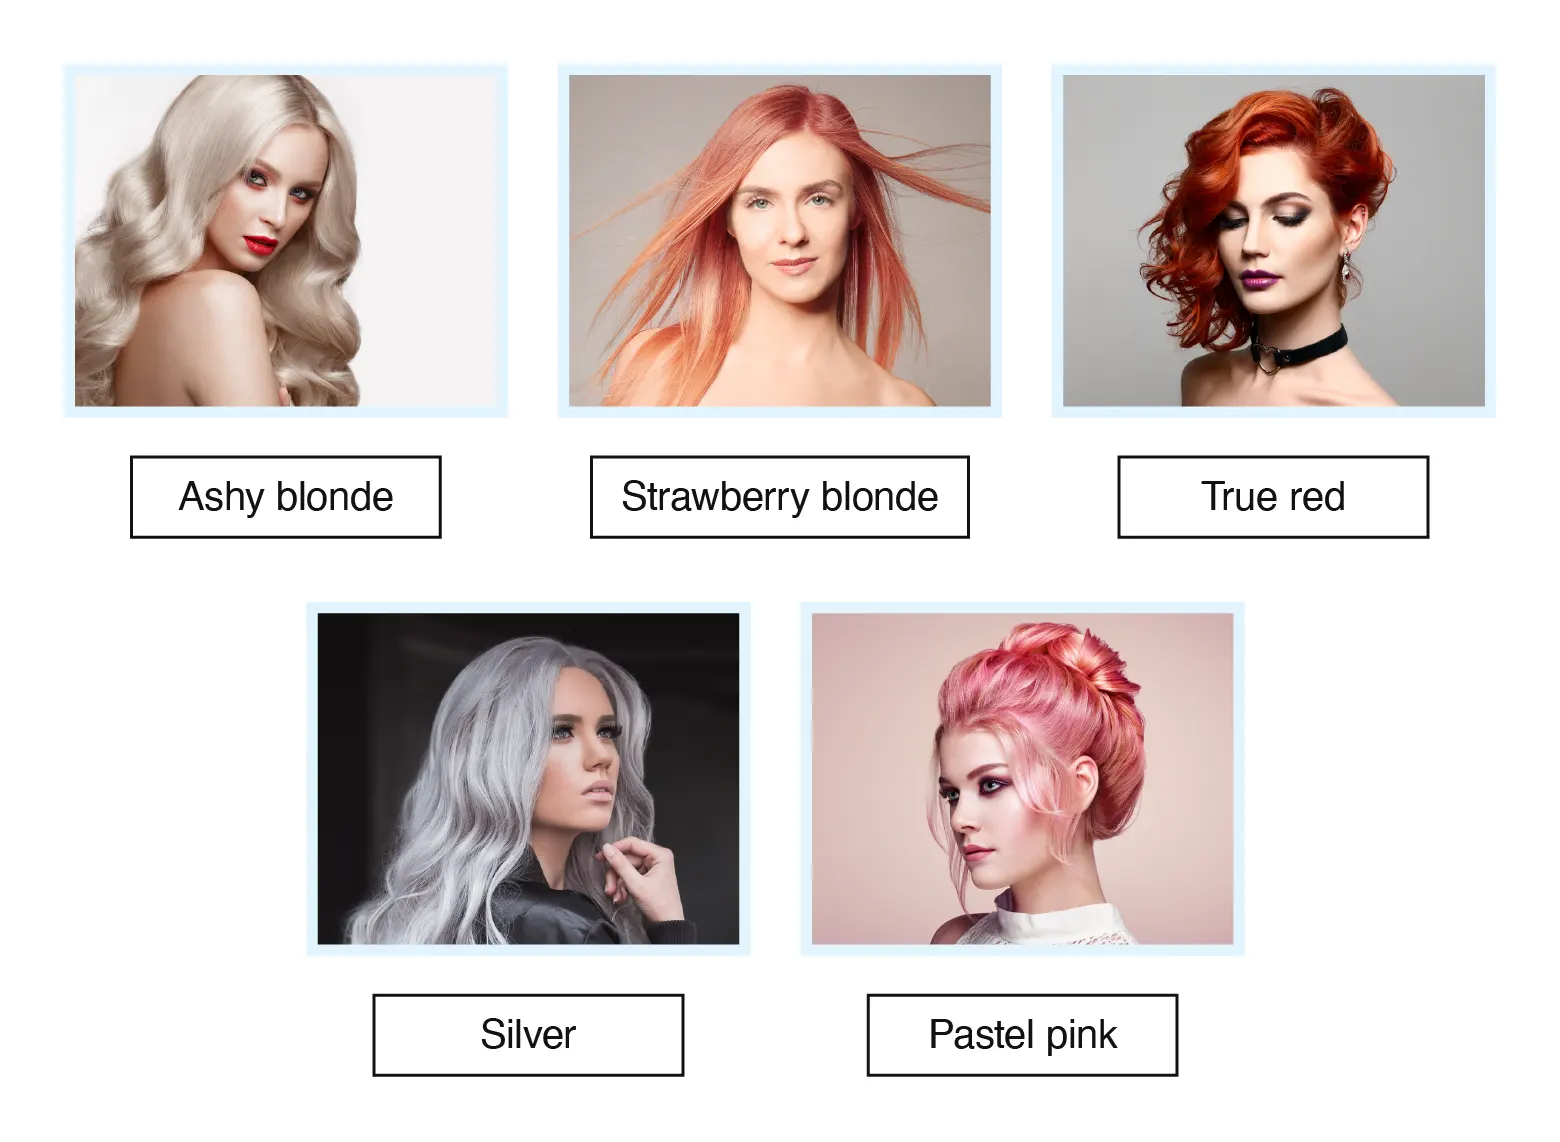 For those with fair skin and cool undertones, we recommend hair colors like ashy blonde, strawberry blonde, true red, silver, or pastel pink.